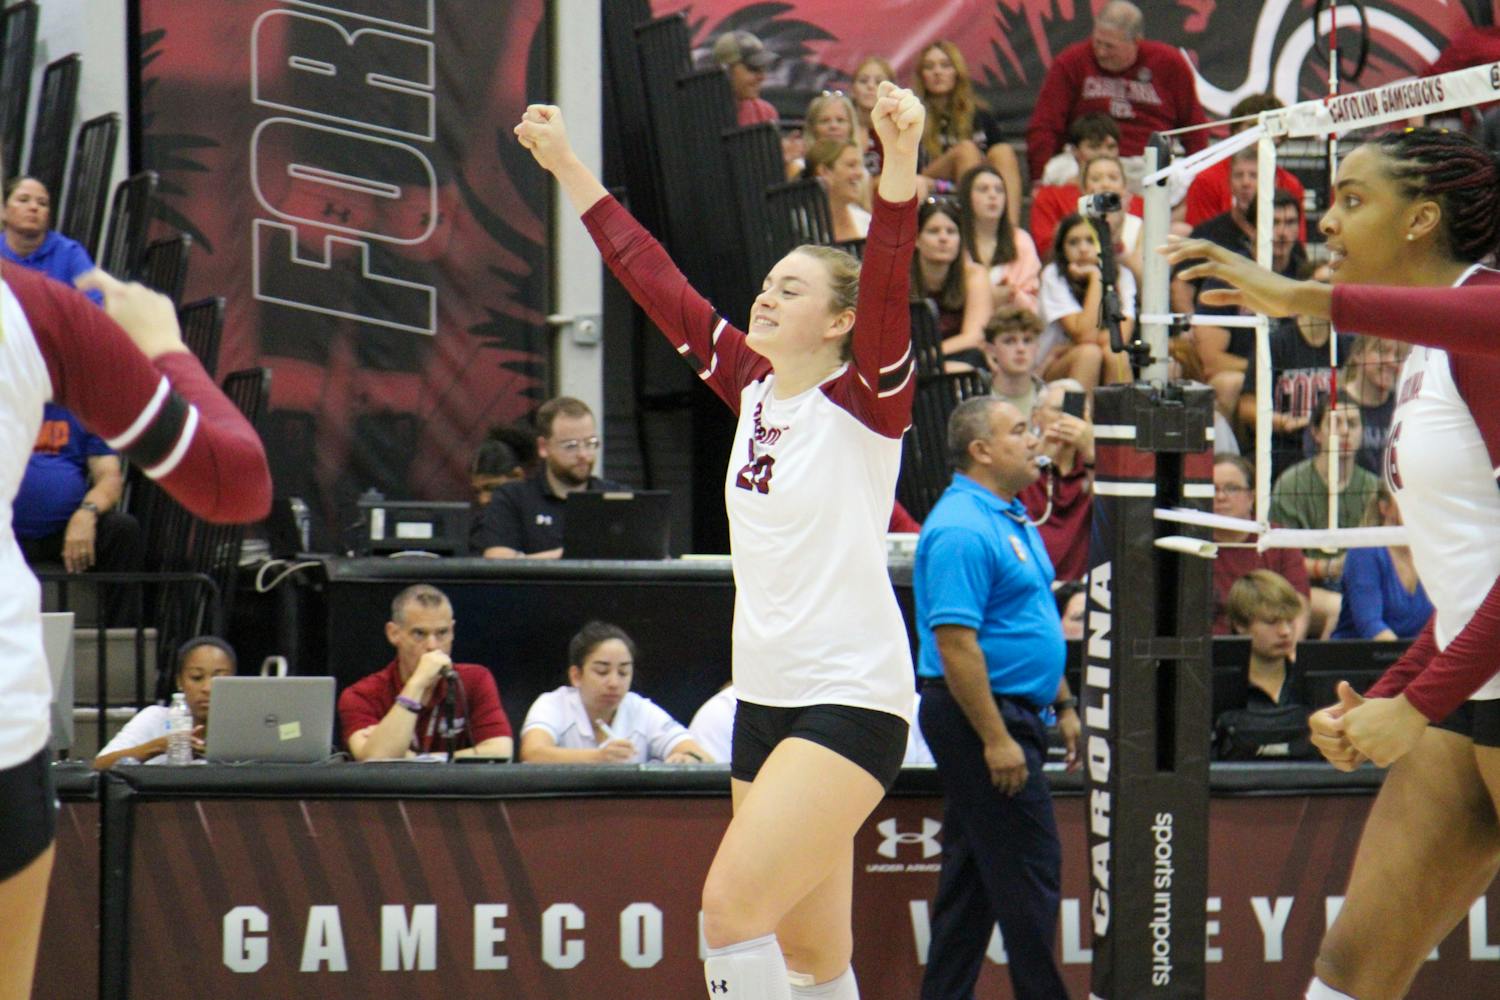 Junior outside hitter Riley Whitesides celebrates after winning a rally against Florida on Sept. 25, 2022.&nbsp;